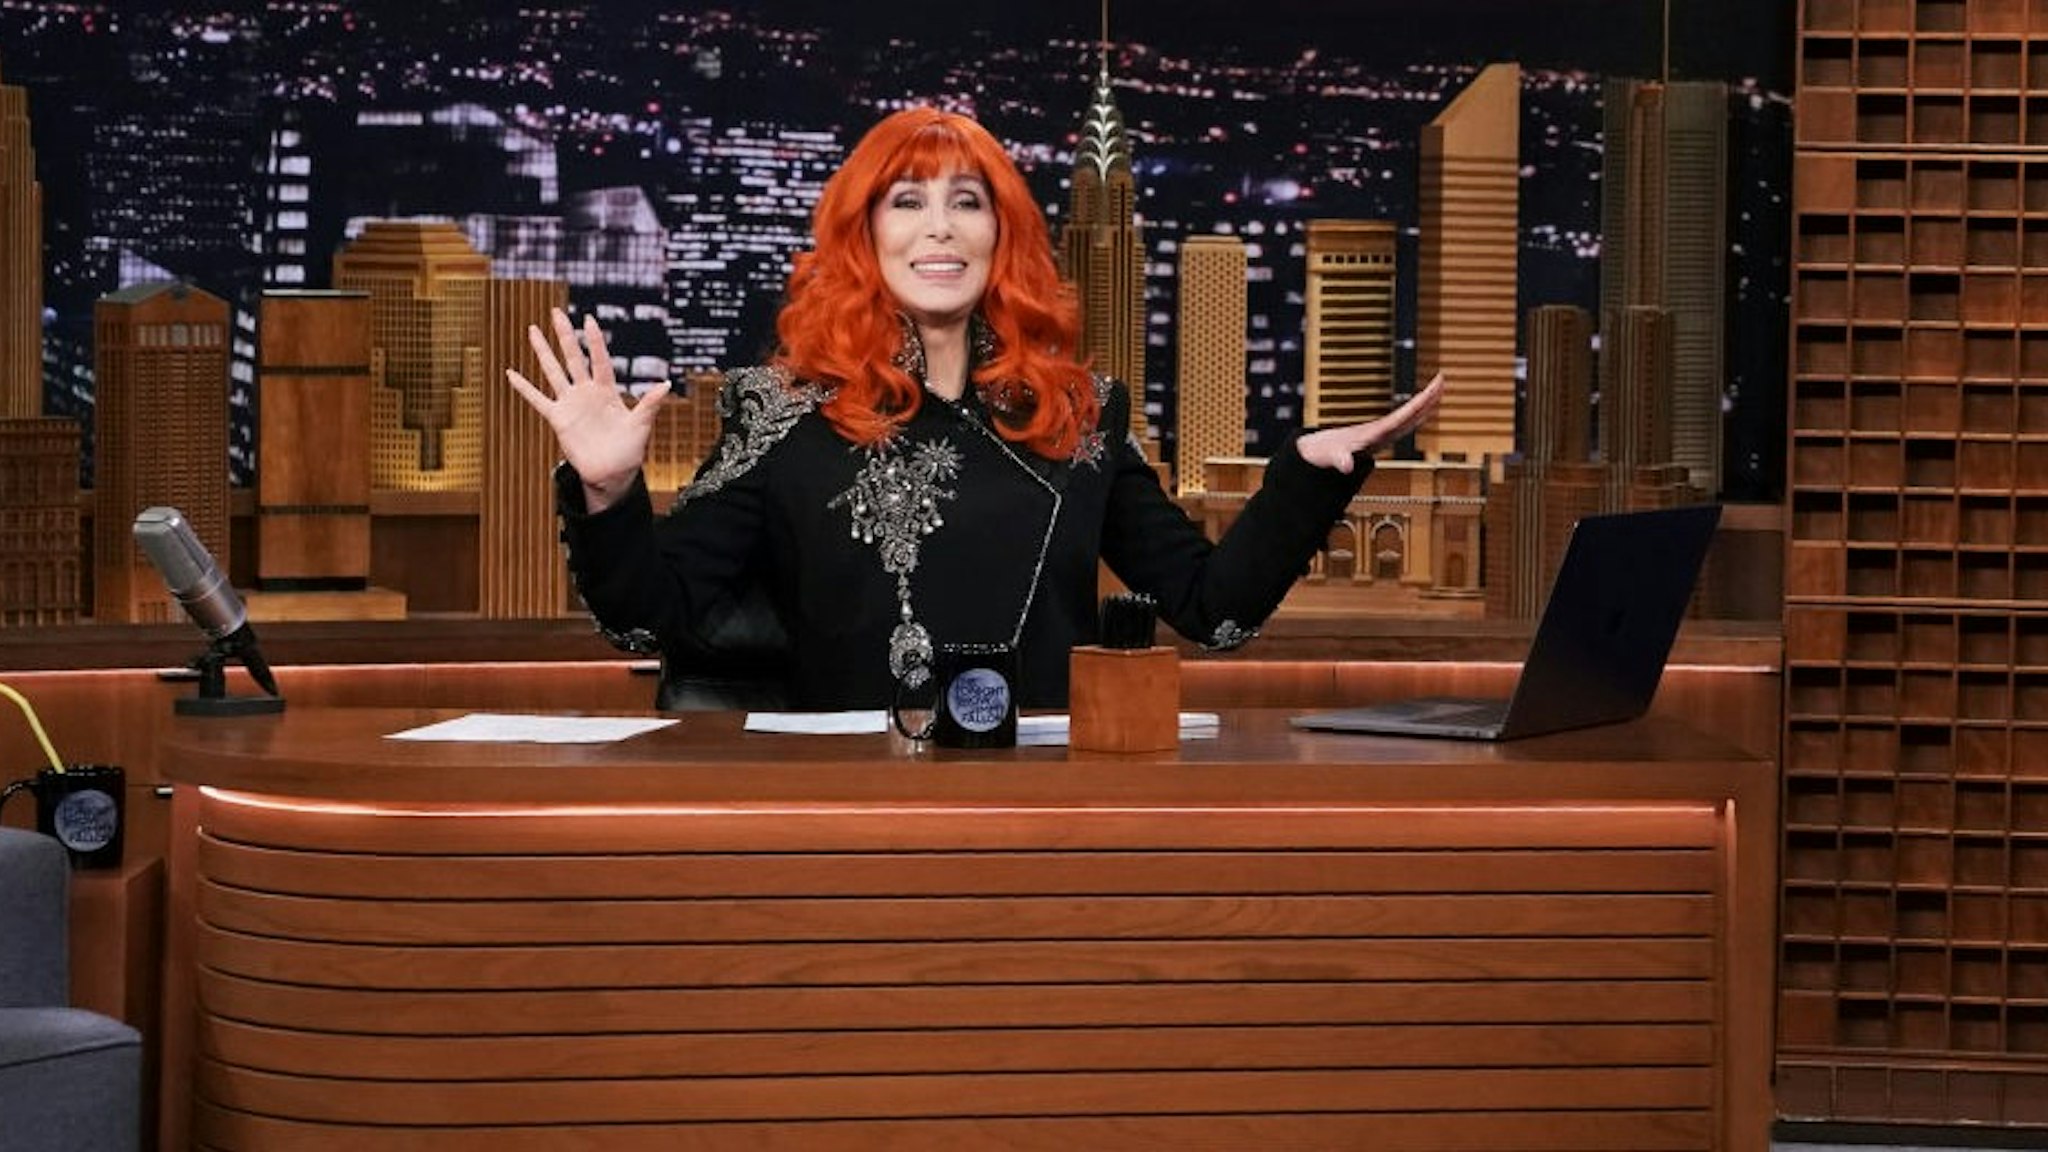 THE TONIGHT SHOW STARRING JIMMY FALLON -- Episode 1048 -- Pictured: Singer Cher sits at the desk on April 15, 2019 -- (Photo by: